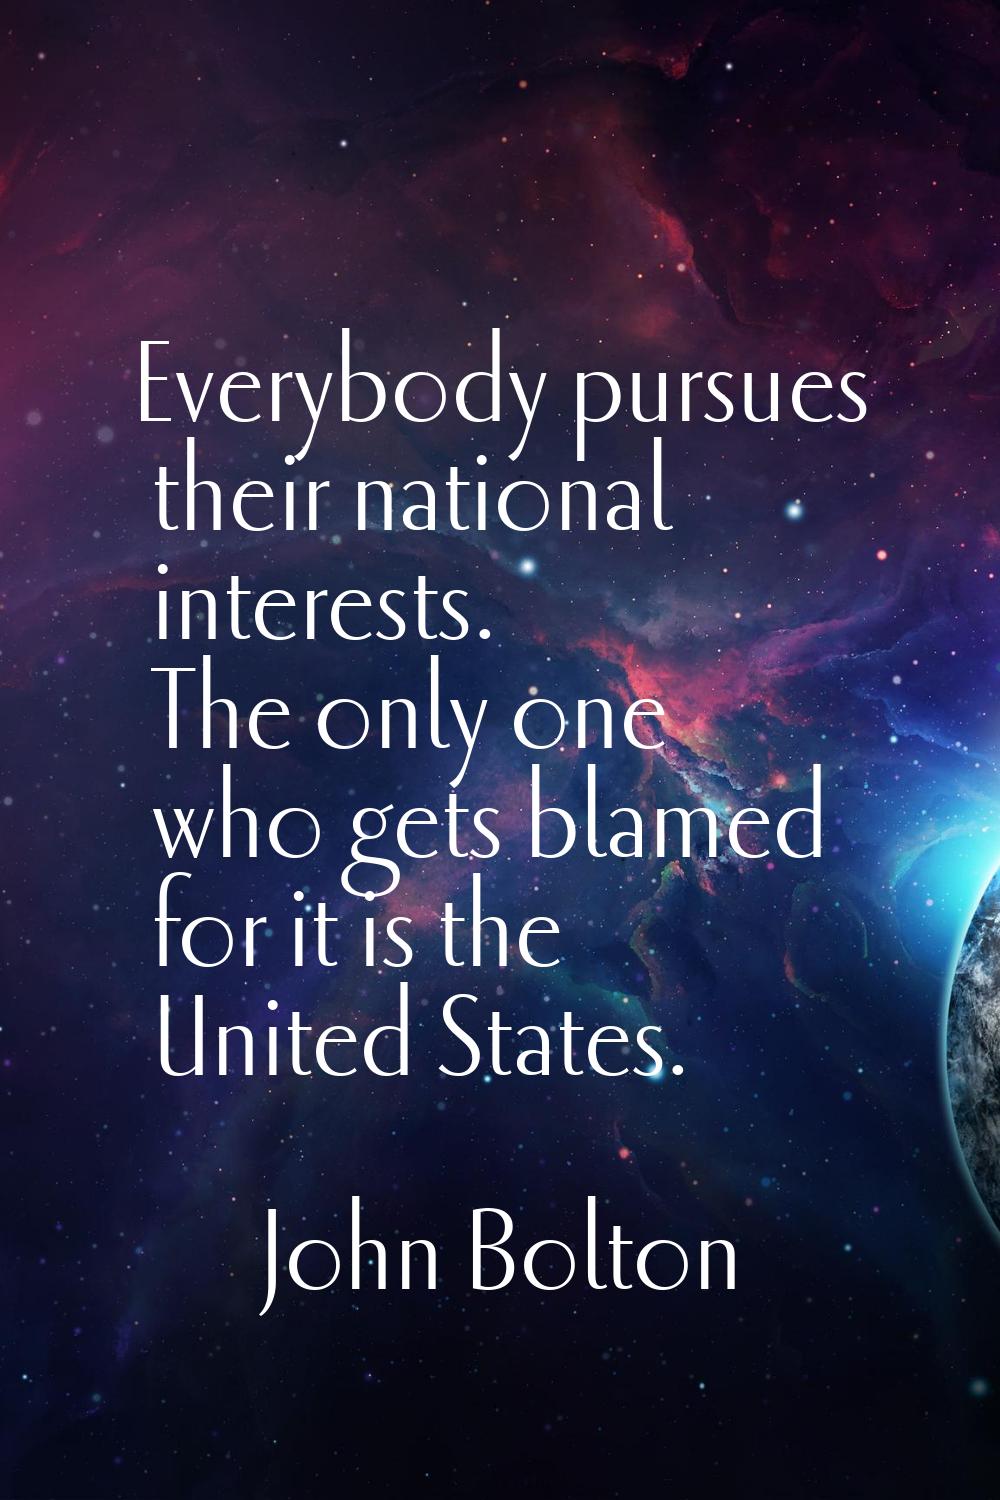 Everybody pursues their national interests. The only one who gets blamed for it is the United State